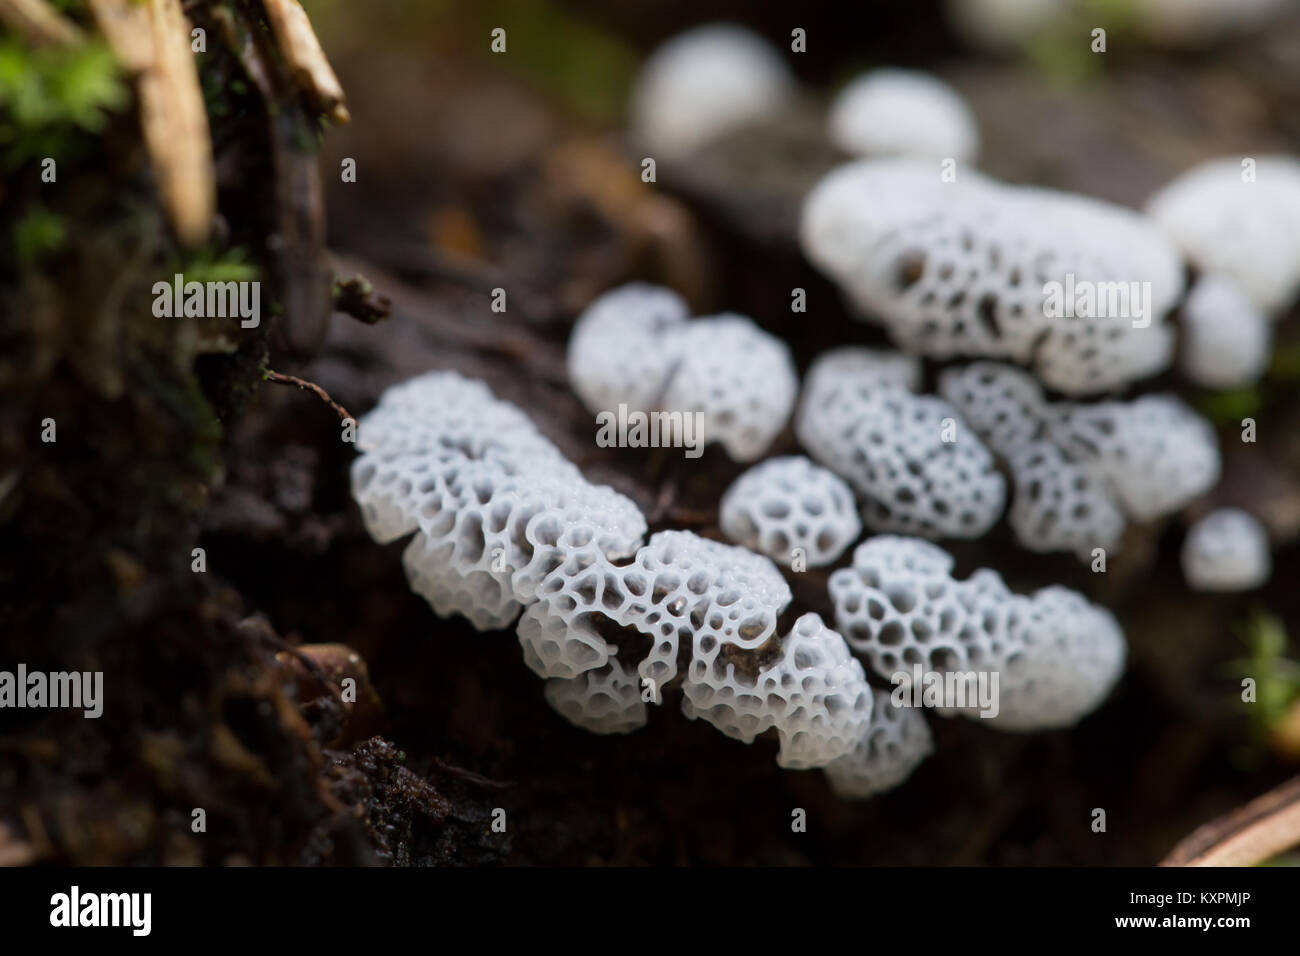 Coral slime mold Stock Photo